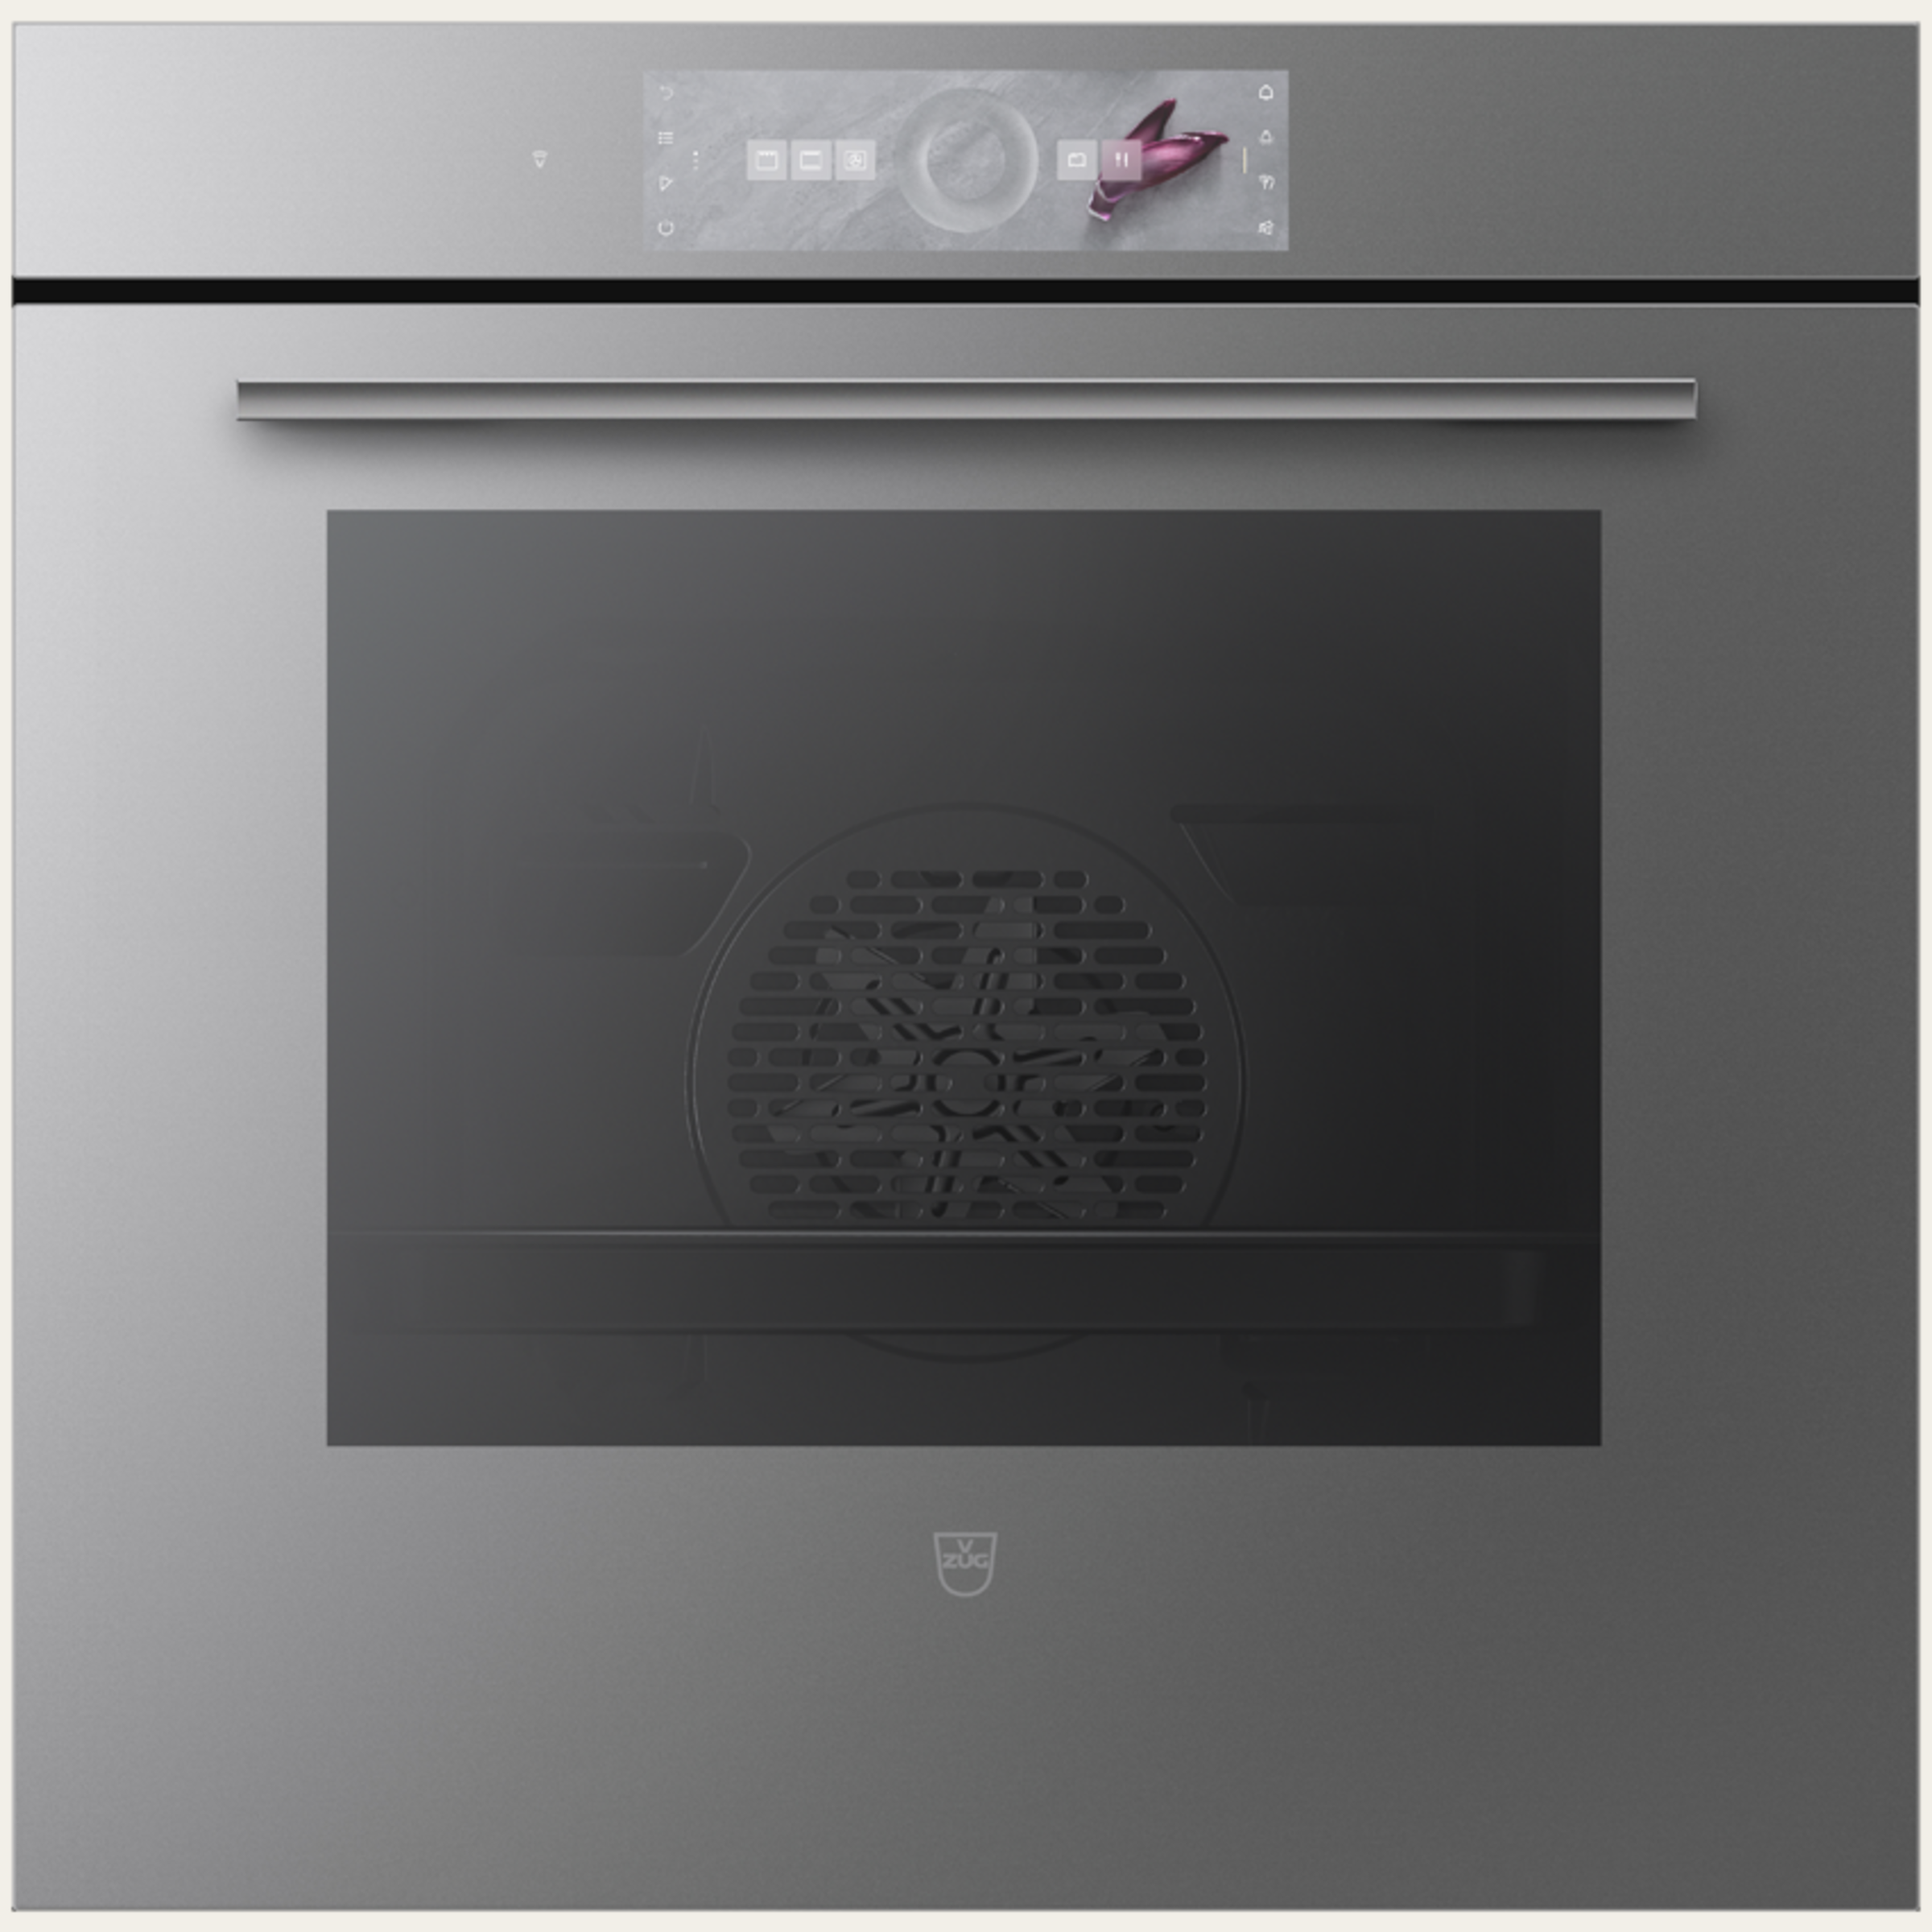 V-ZUG Oven Combair V6000 60P, Standard width: 60 cm,Standard height: 60 cm, Platinum mirror glass, Touchscreen with CircleSlider, V-ZUG-Home, Pyrolytic self-cleaning